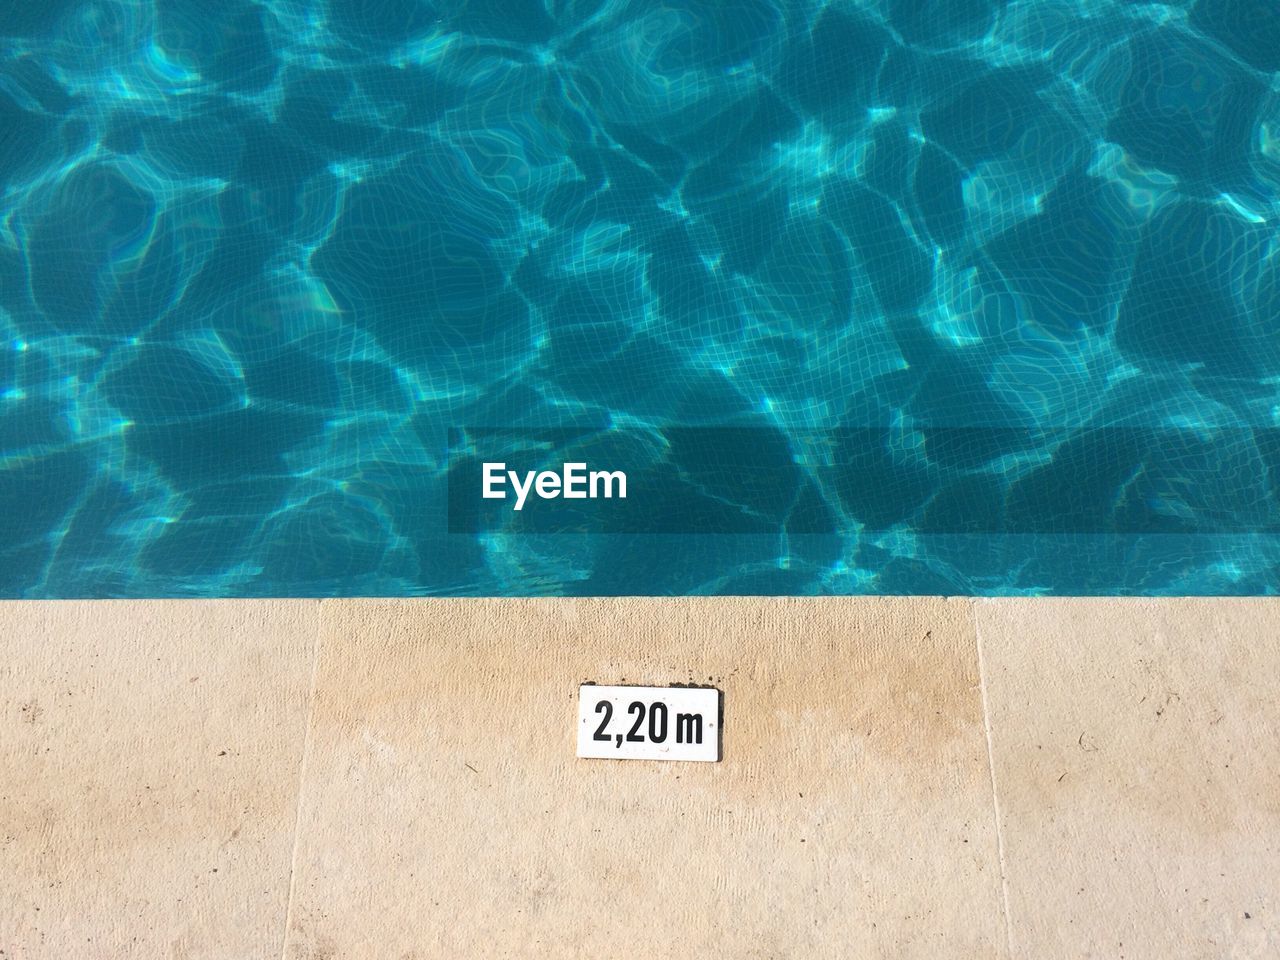 HIGH ANGLE VIEW OF INFORMATION SIGN ON SWIMMING POOL